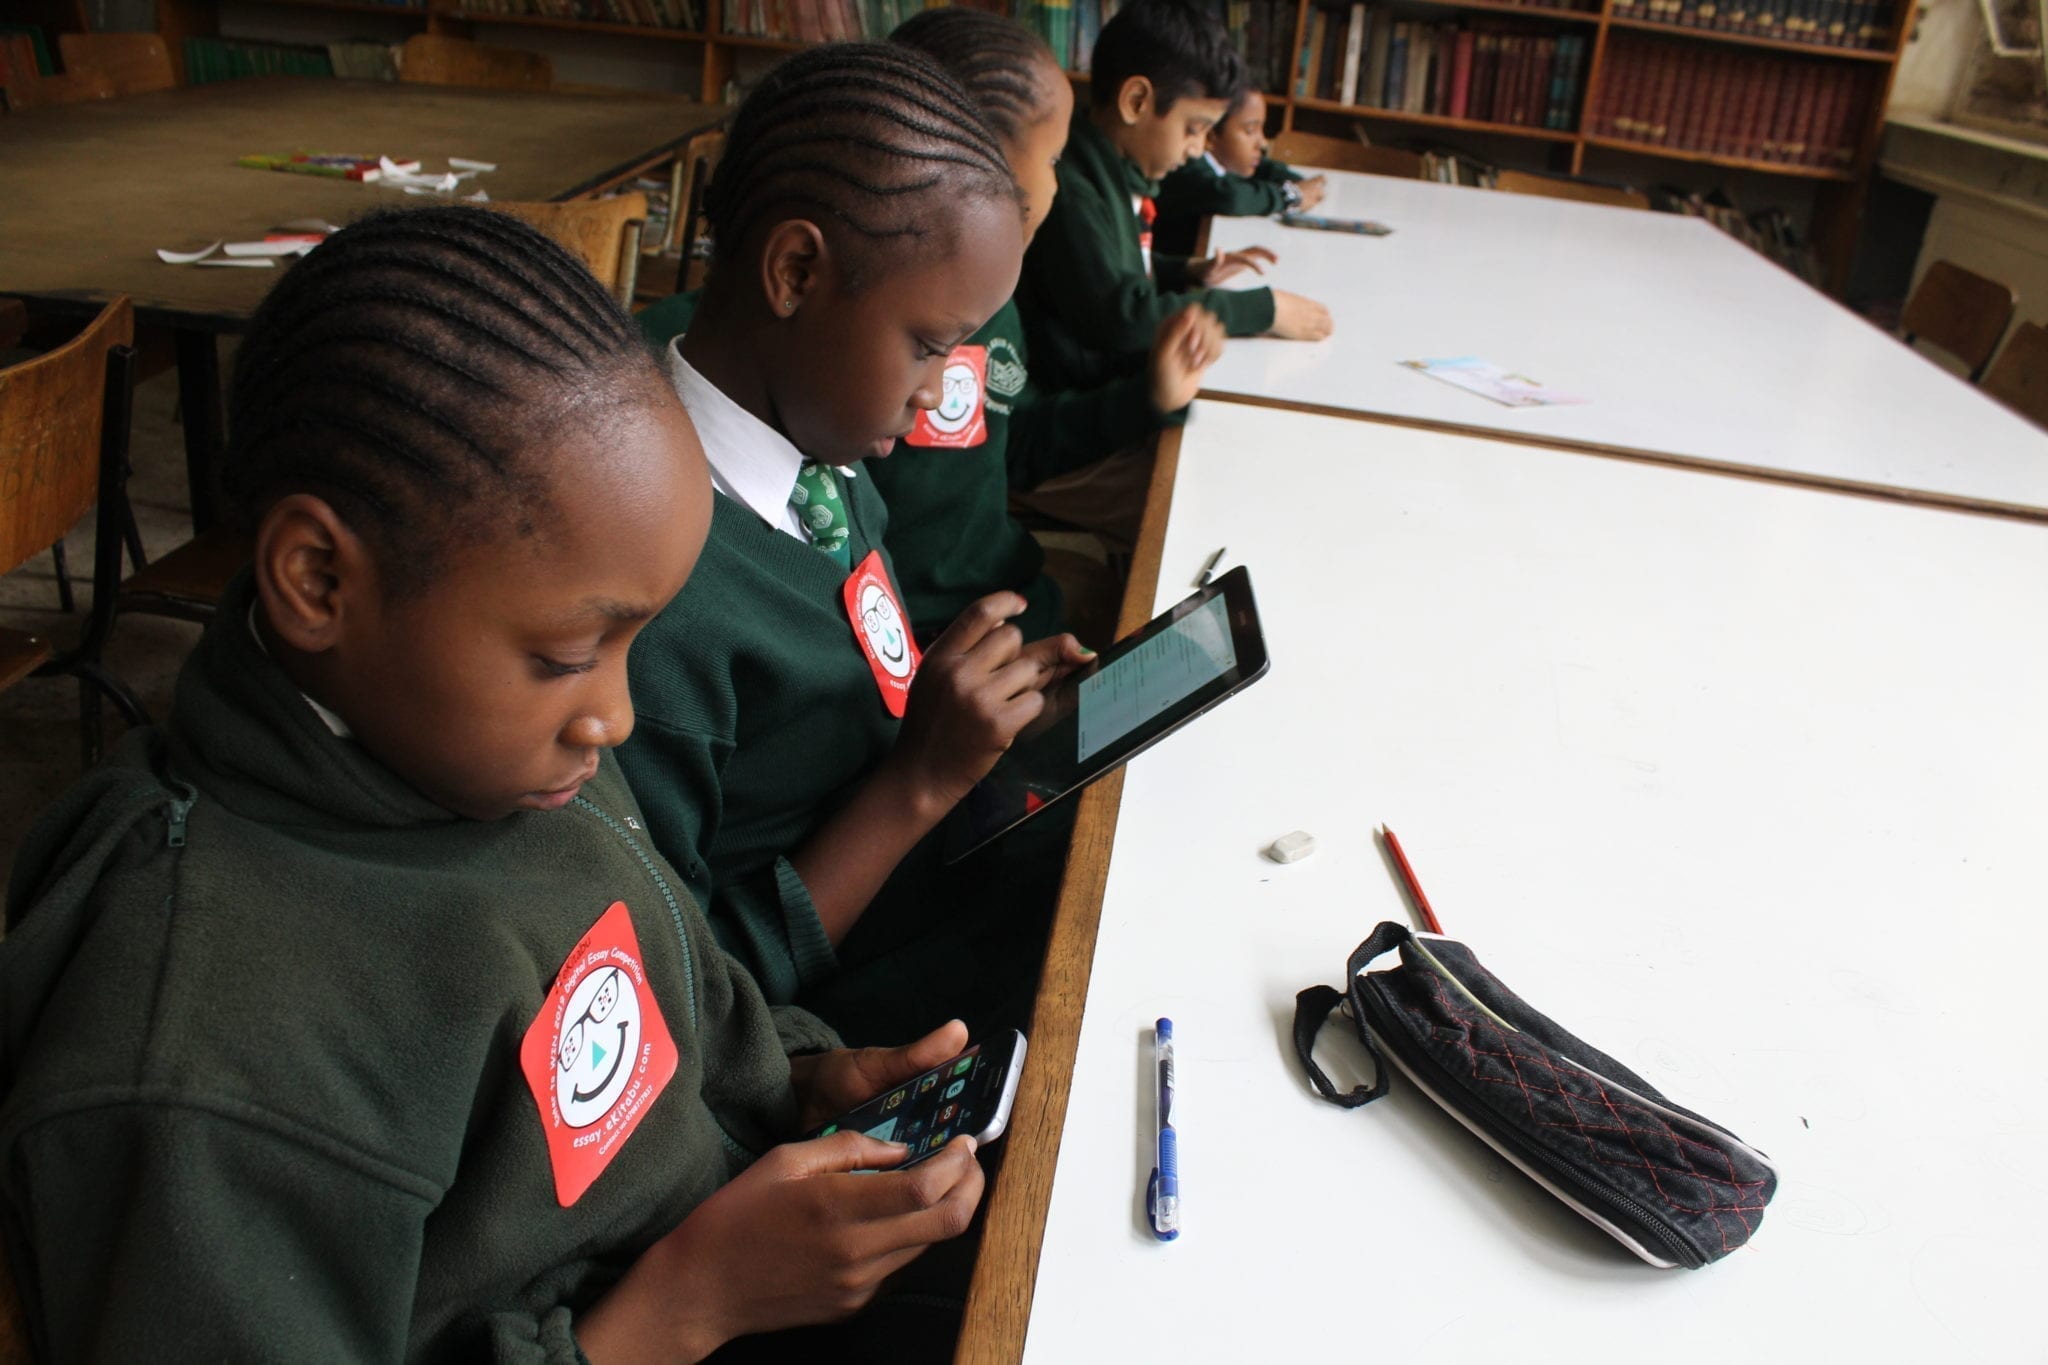 Children in Kenya interact with accessible digital books created by eKitabu.